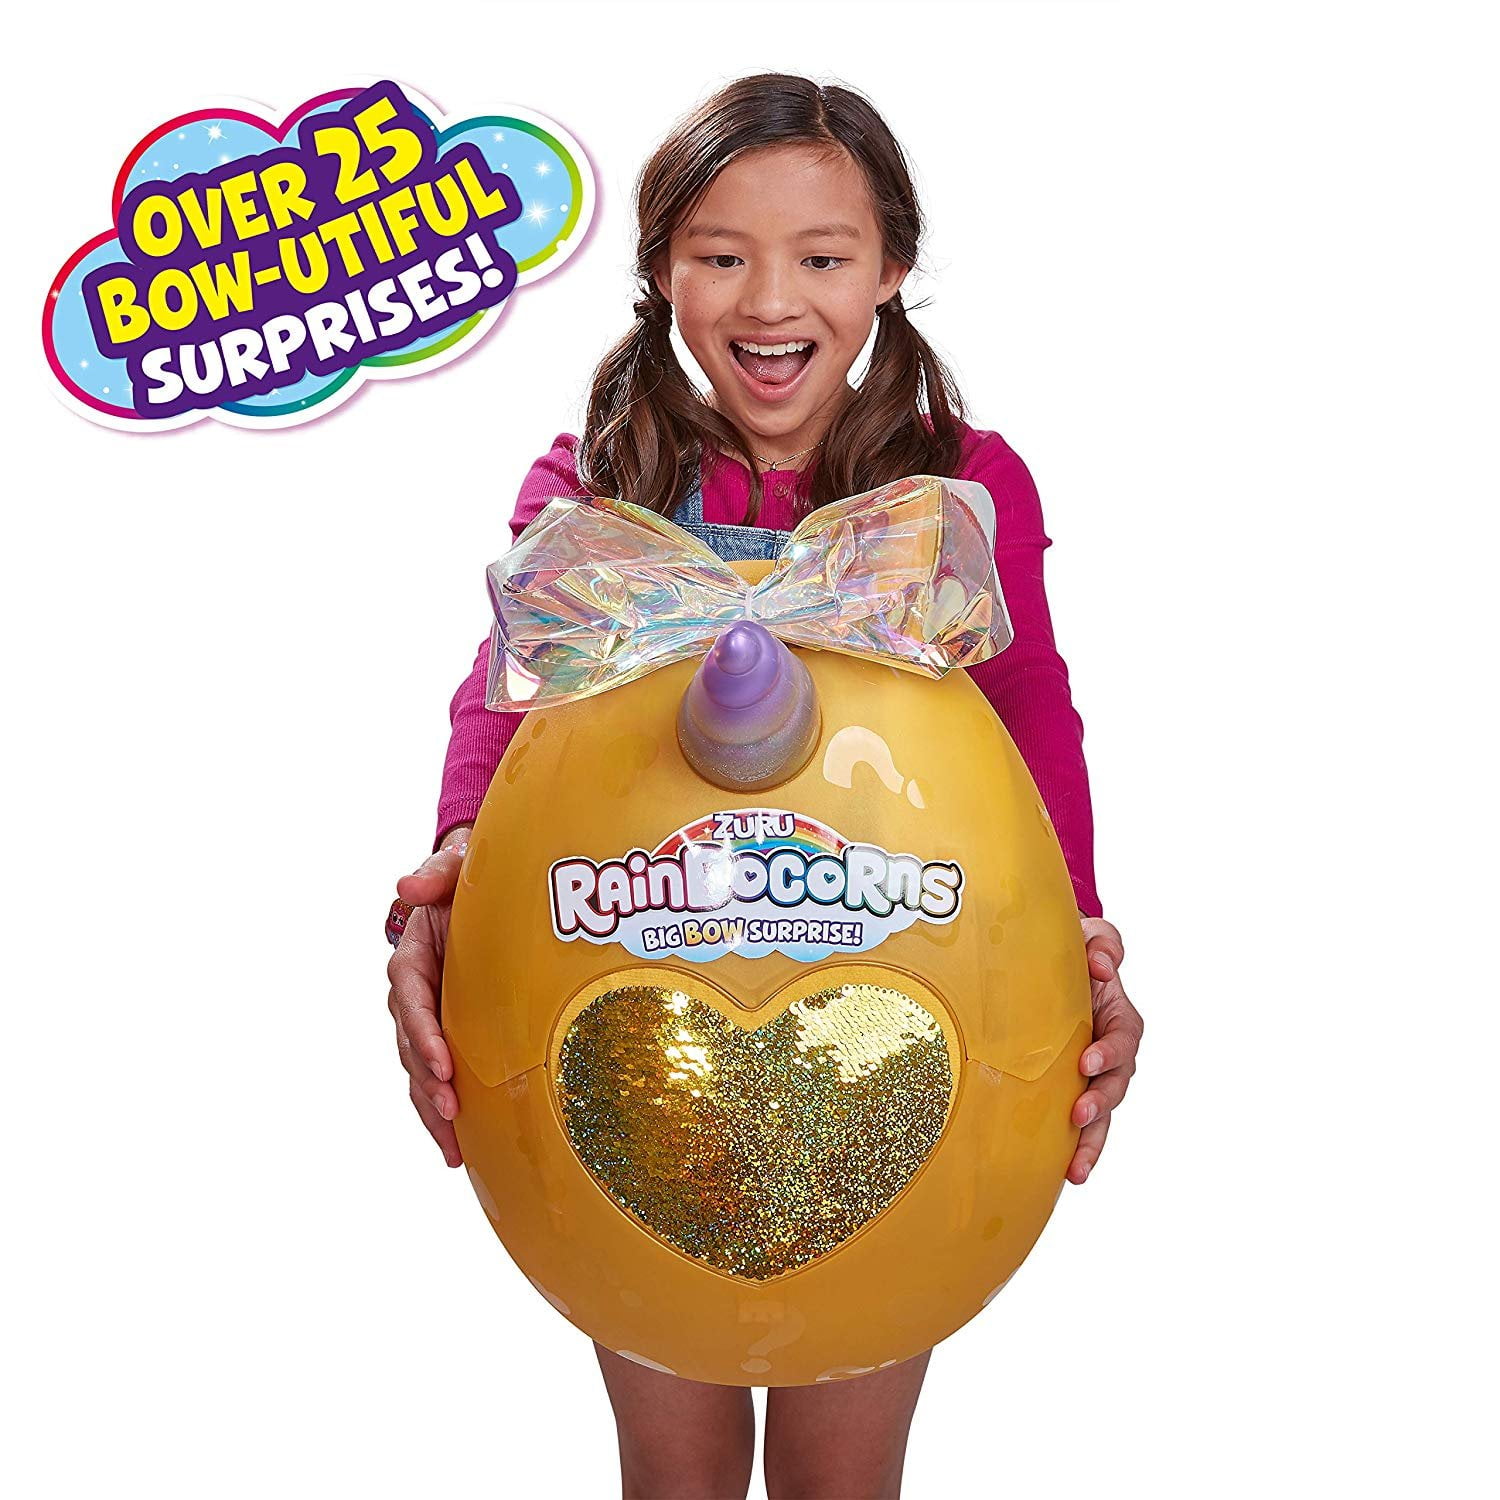 Best Birthday Gift 25 Surprise Details about   Rainbocorns Giant Big Bow Surprise Mystery Egg